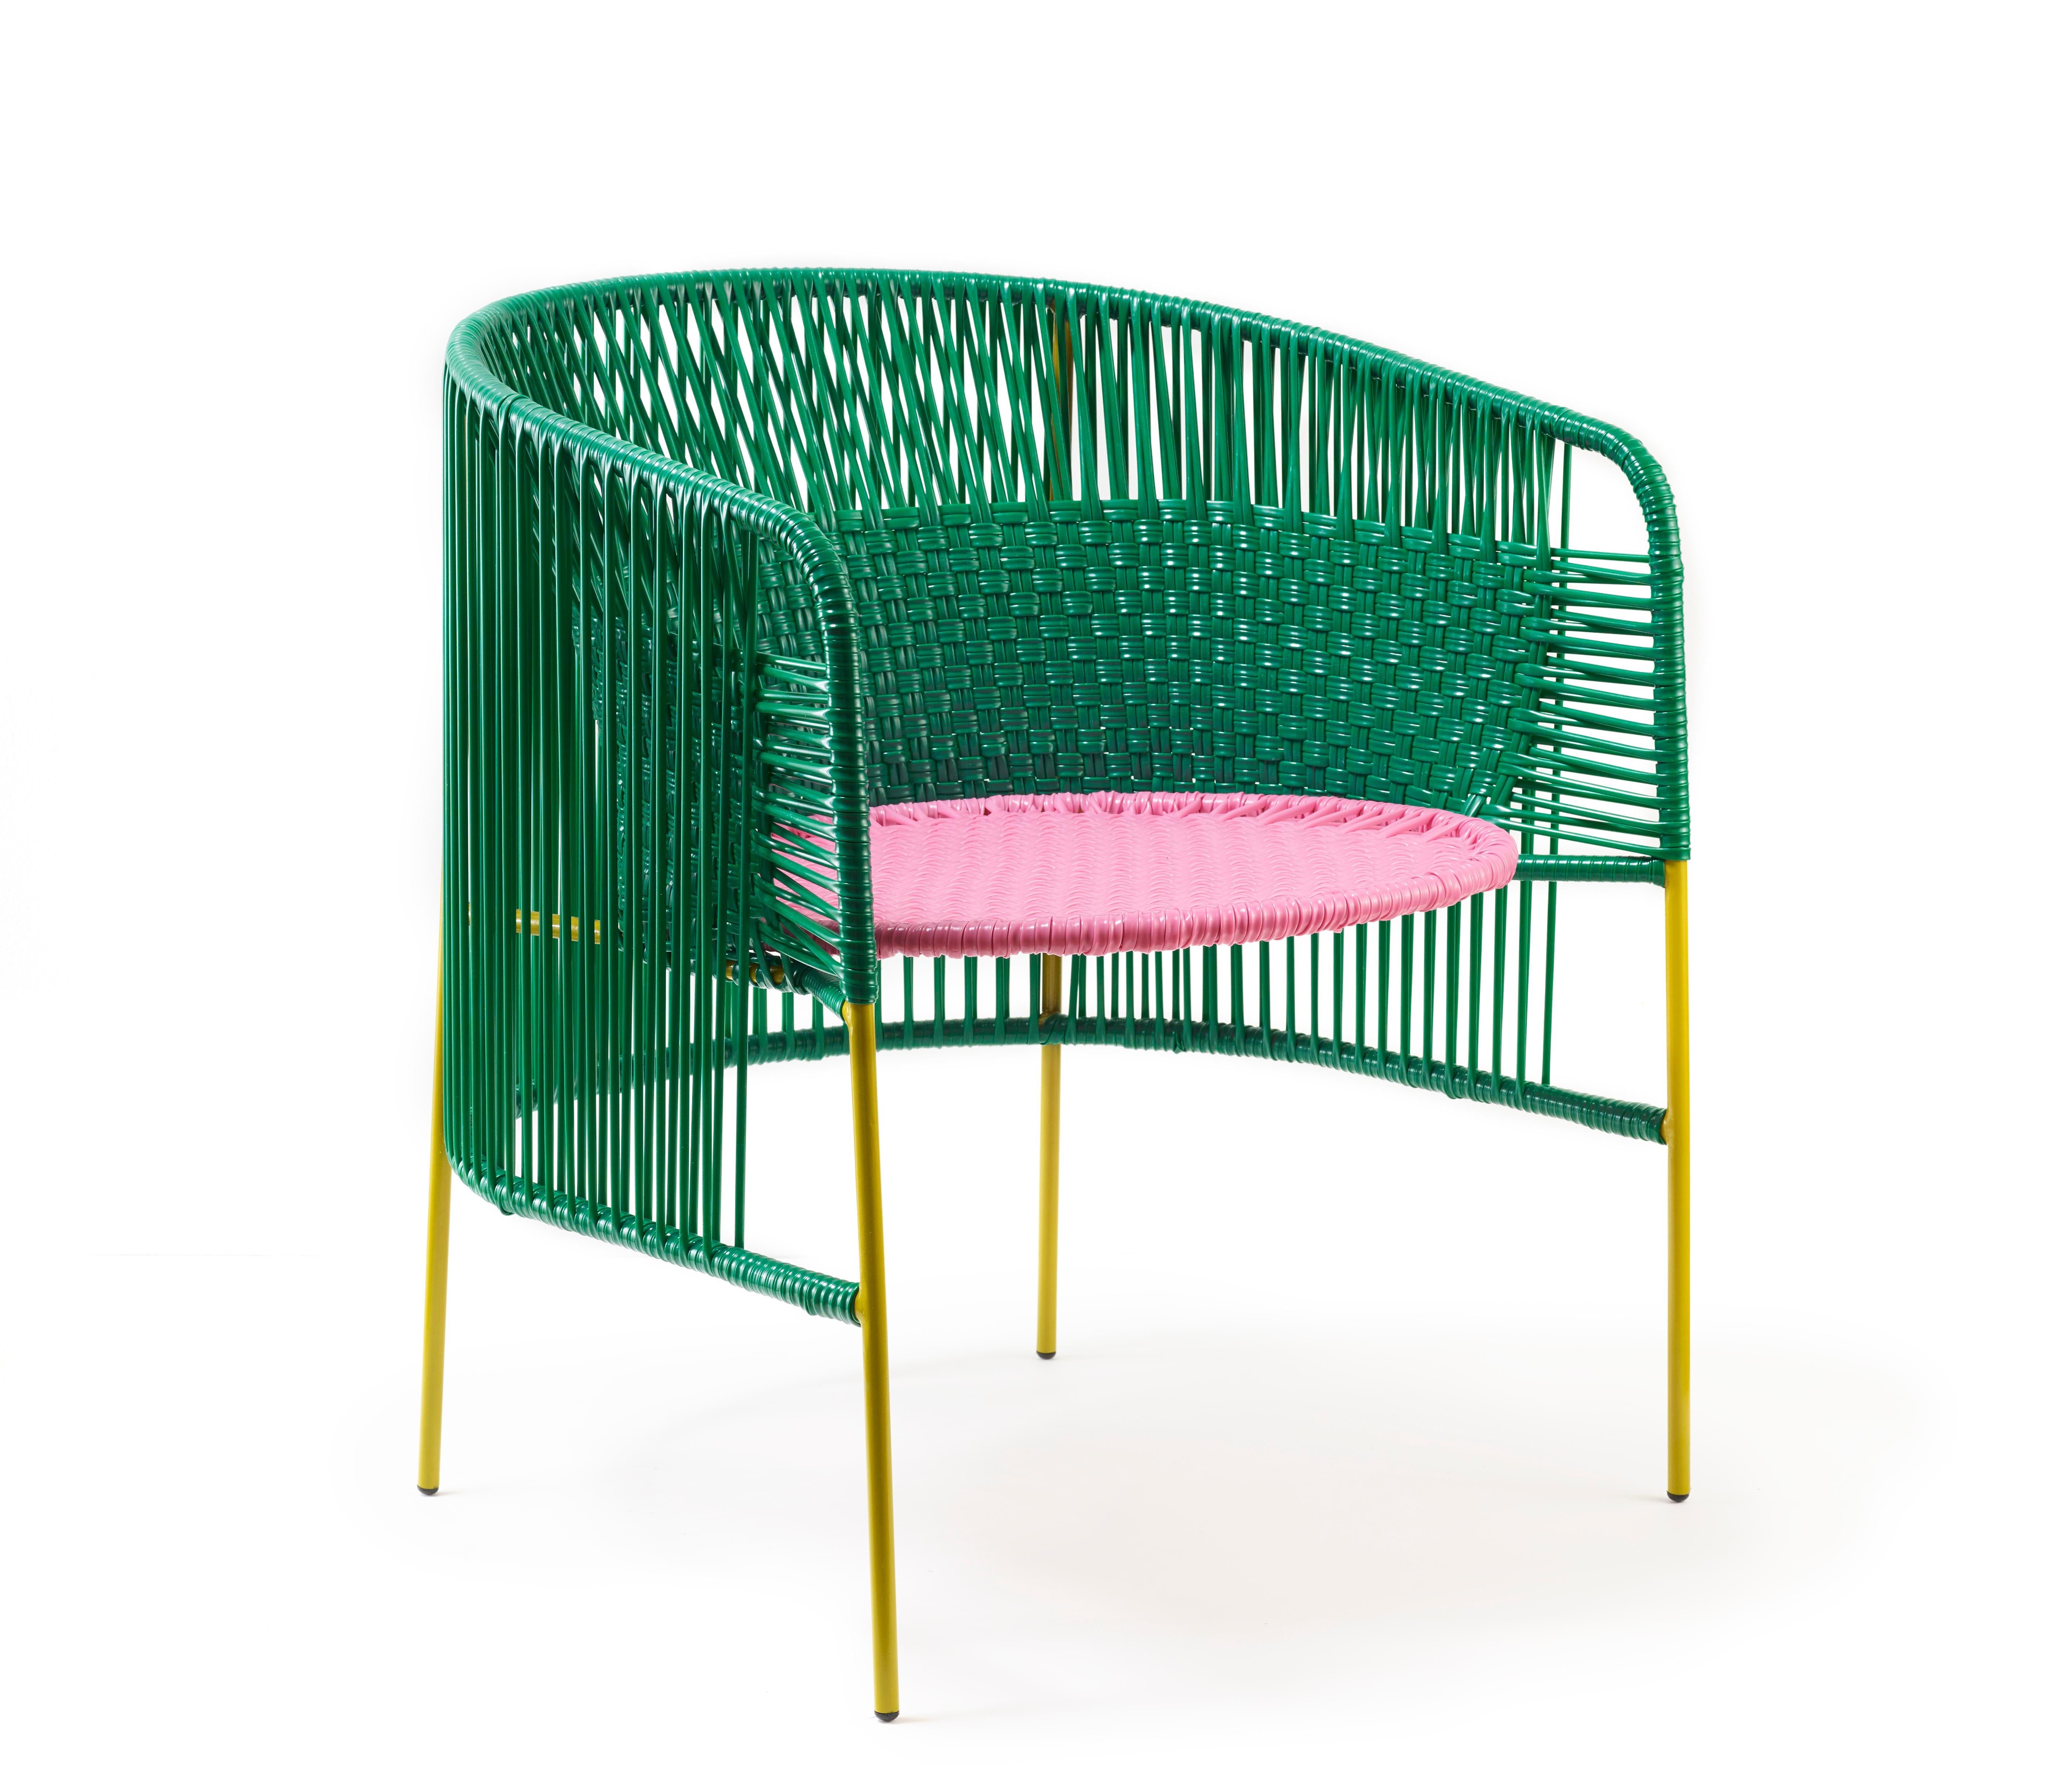 Set of 4 green Caribe lounge chair by Sebastian Herkner.
Materials: galvanized and powder-coated tubular steel. PVC strings are made from recycled plastic.
Technique: made from recycled plastic and weaved by local craftspeople in Colombia.